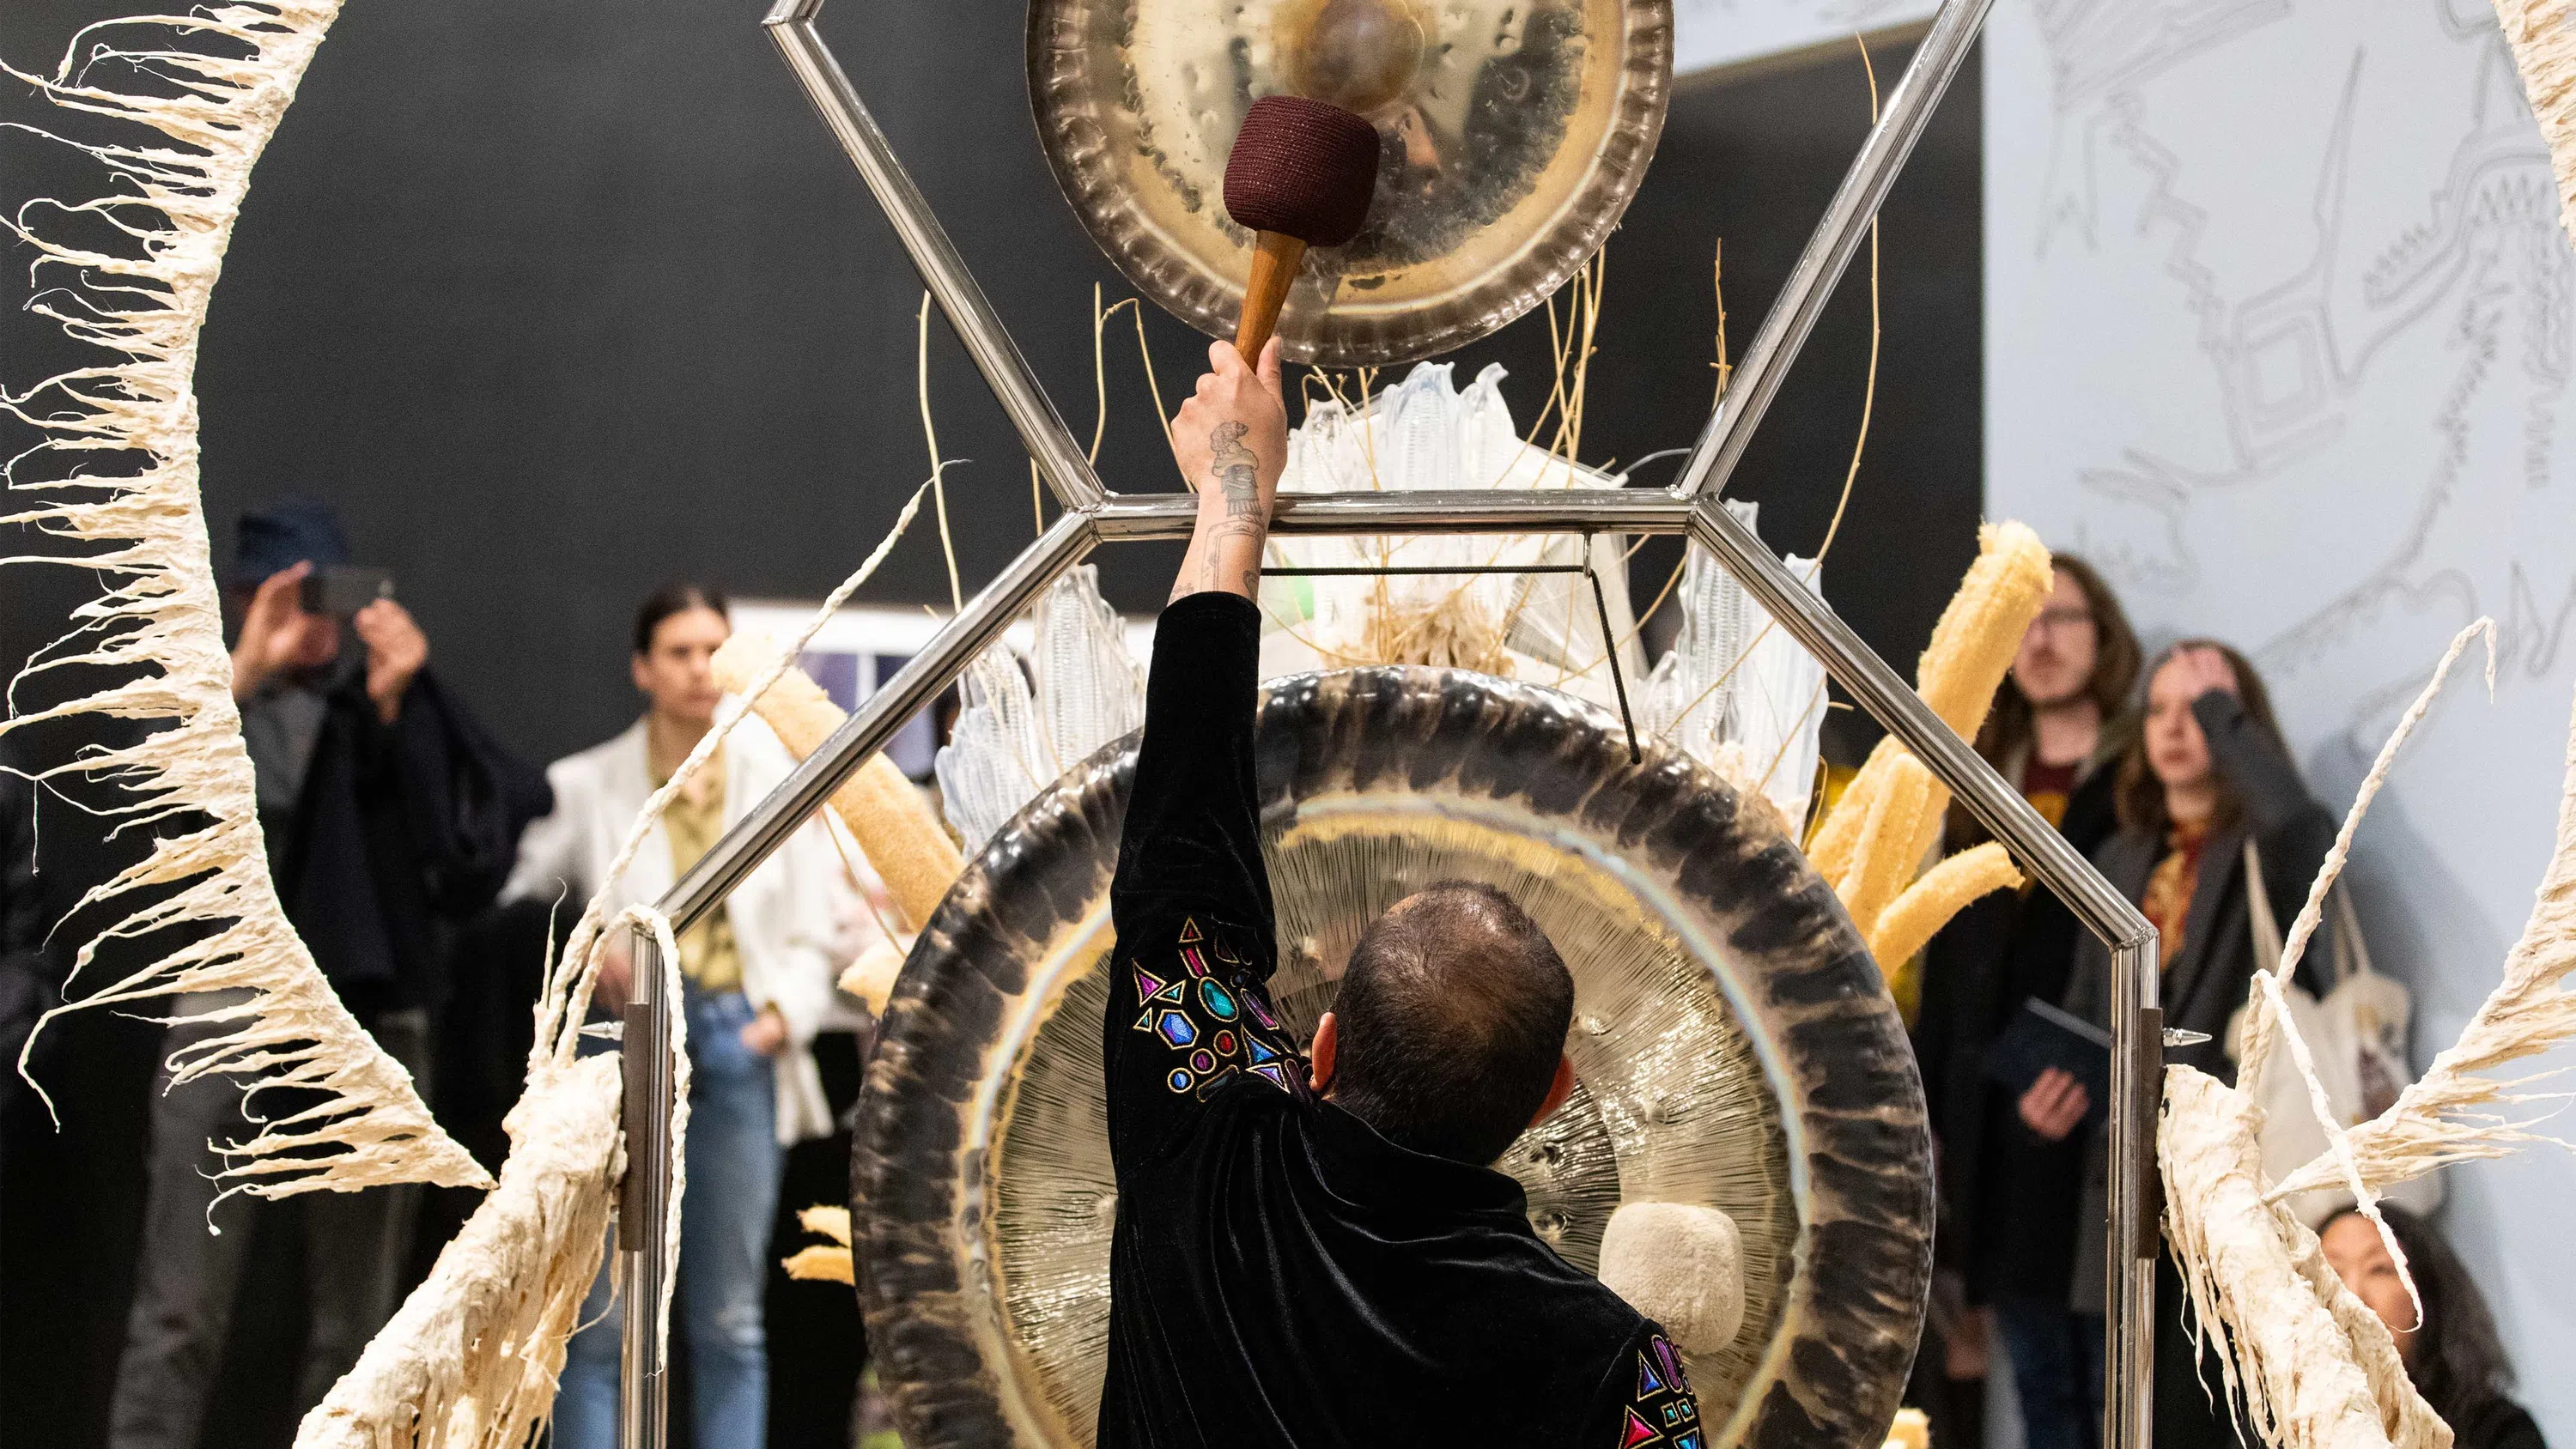  A person bangs on a large percussion instrument. 